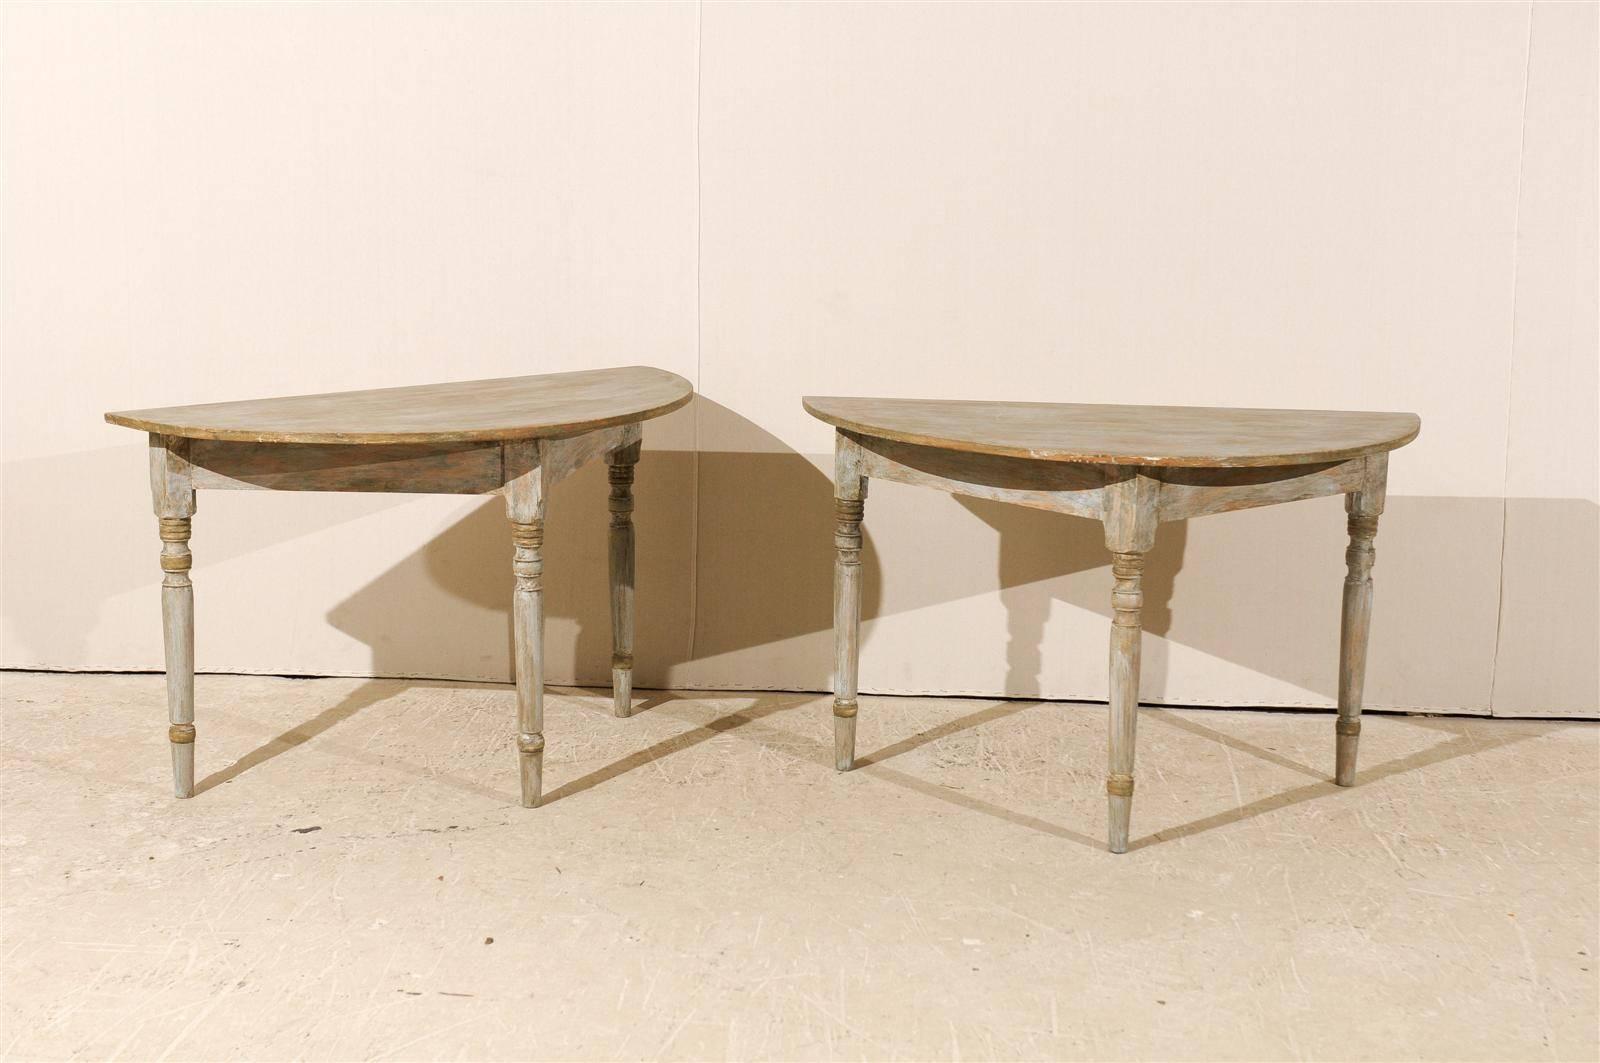 A pair of 19th century Swedish painted wood demi-lune tables. This pair of Swedish demi-lune tables is painted in a light grey finish with wood coming through. Each features a semi-circular top over a triangular shaped apron. Both are raised on